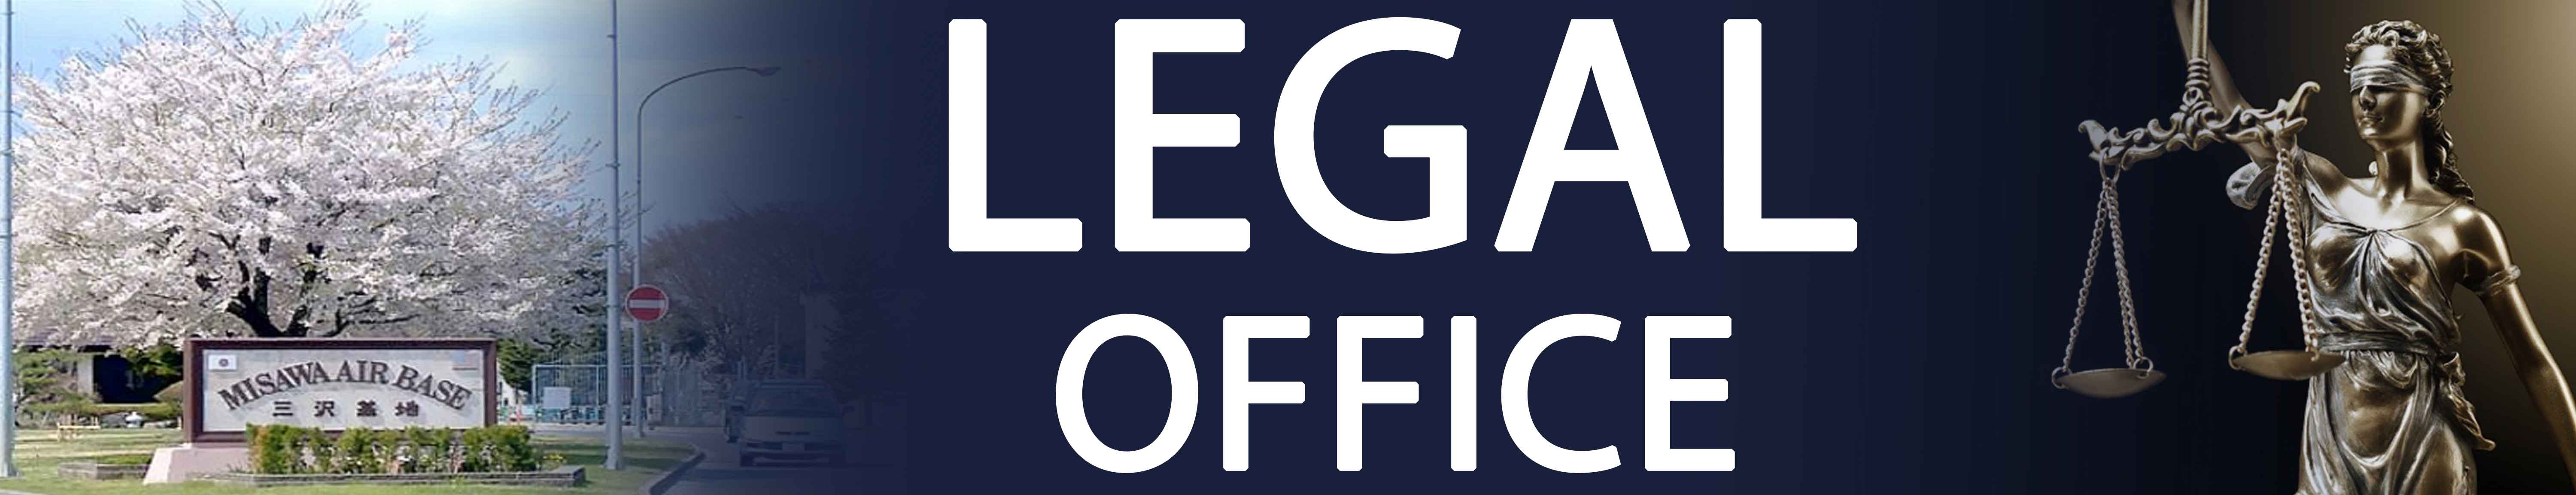 Legal Office